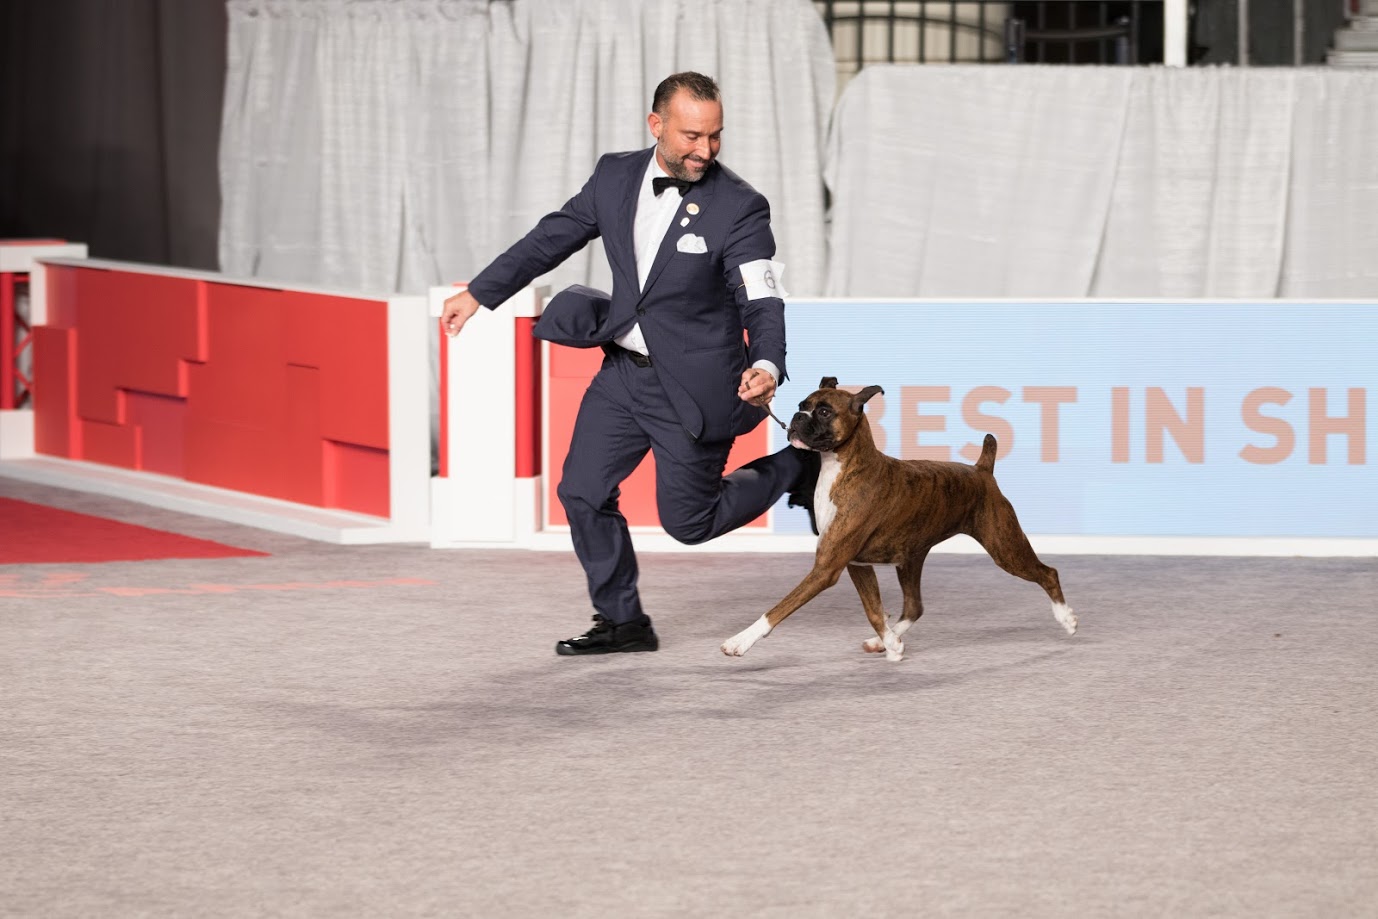 AKC National Championship Dog Show Presented by Royal Canin to Air on